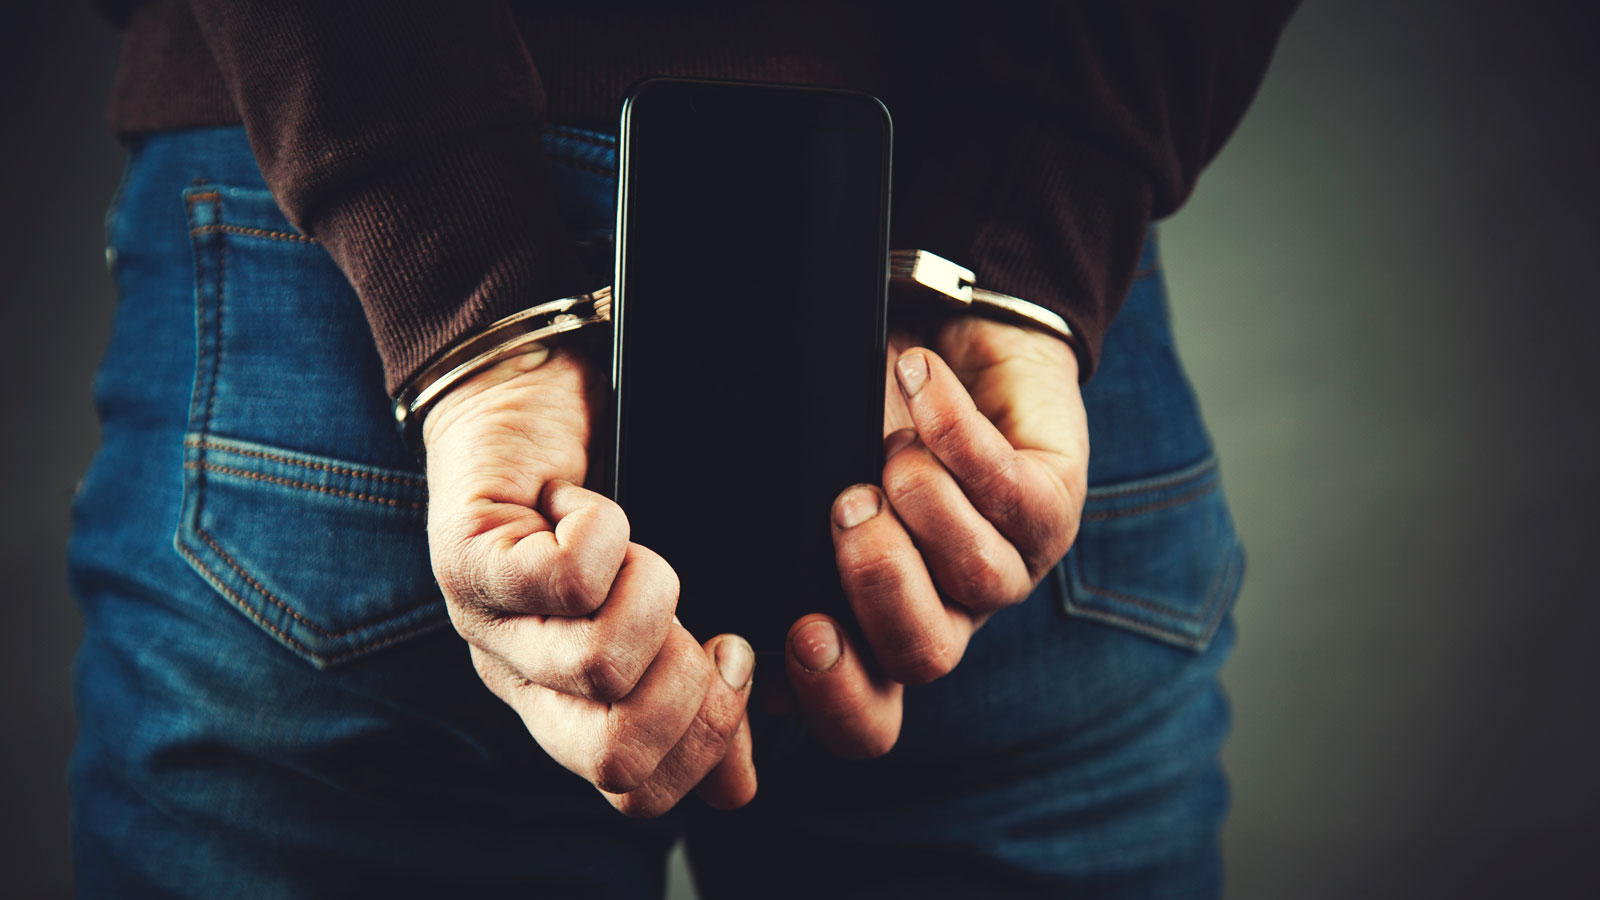 Arrested person holding a phone